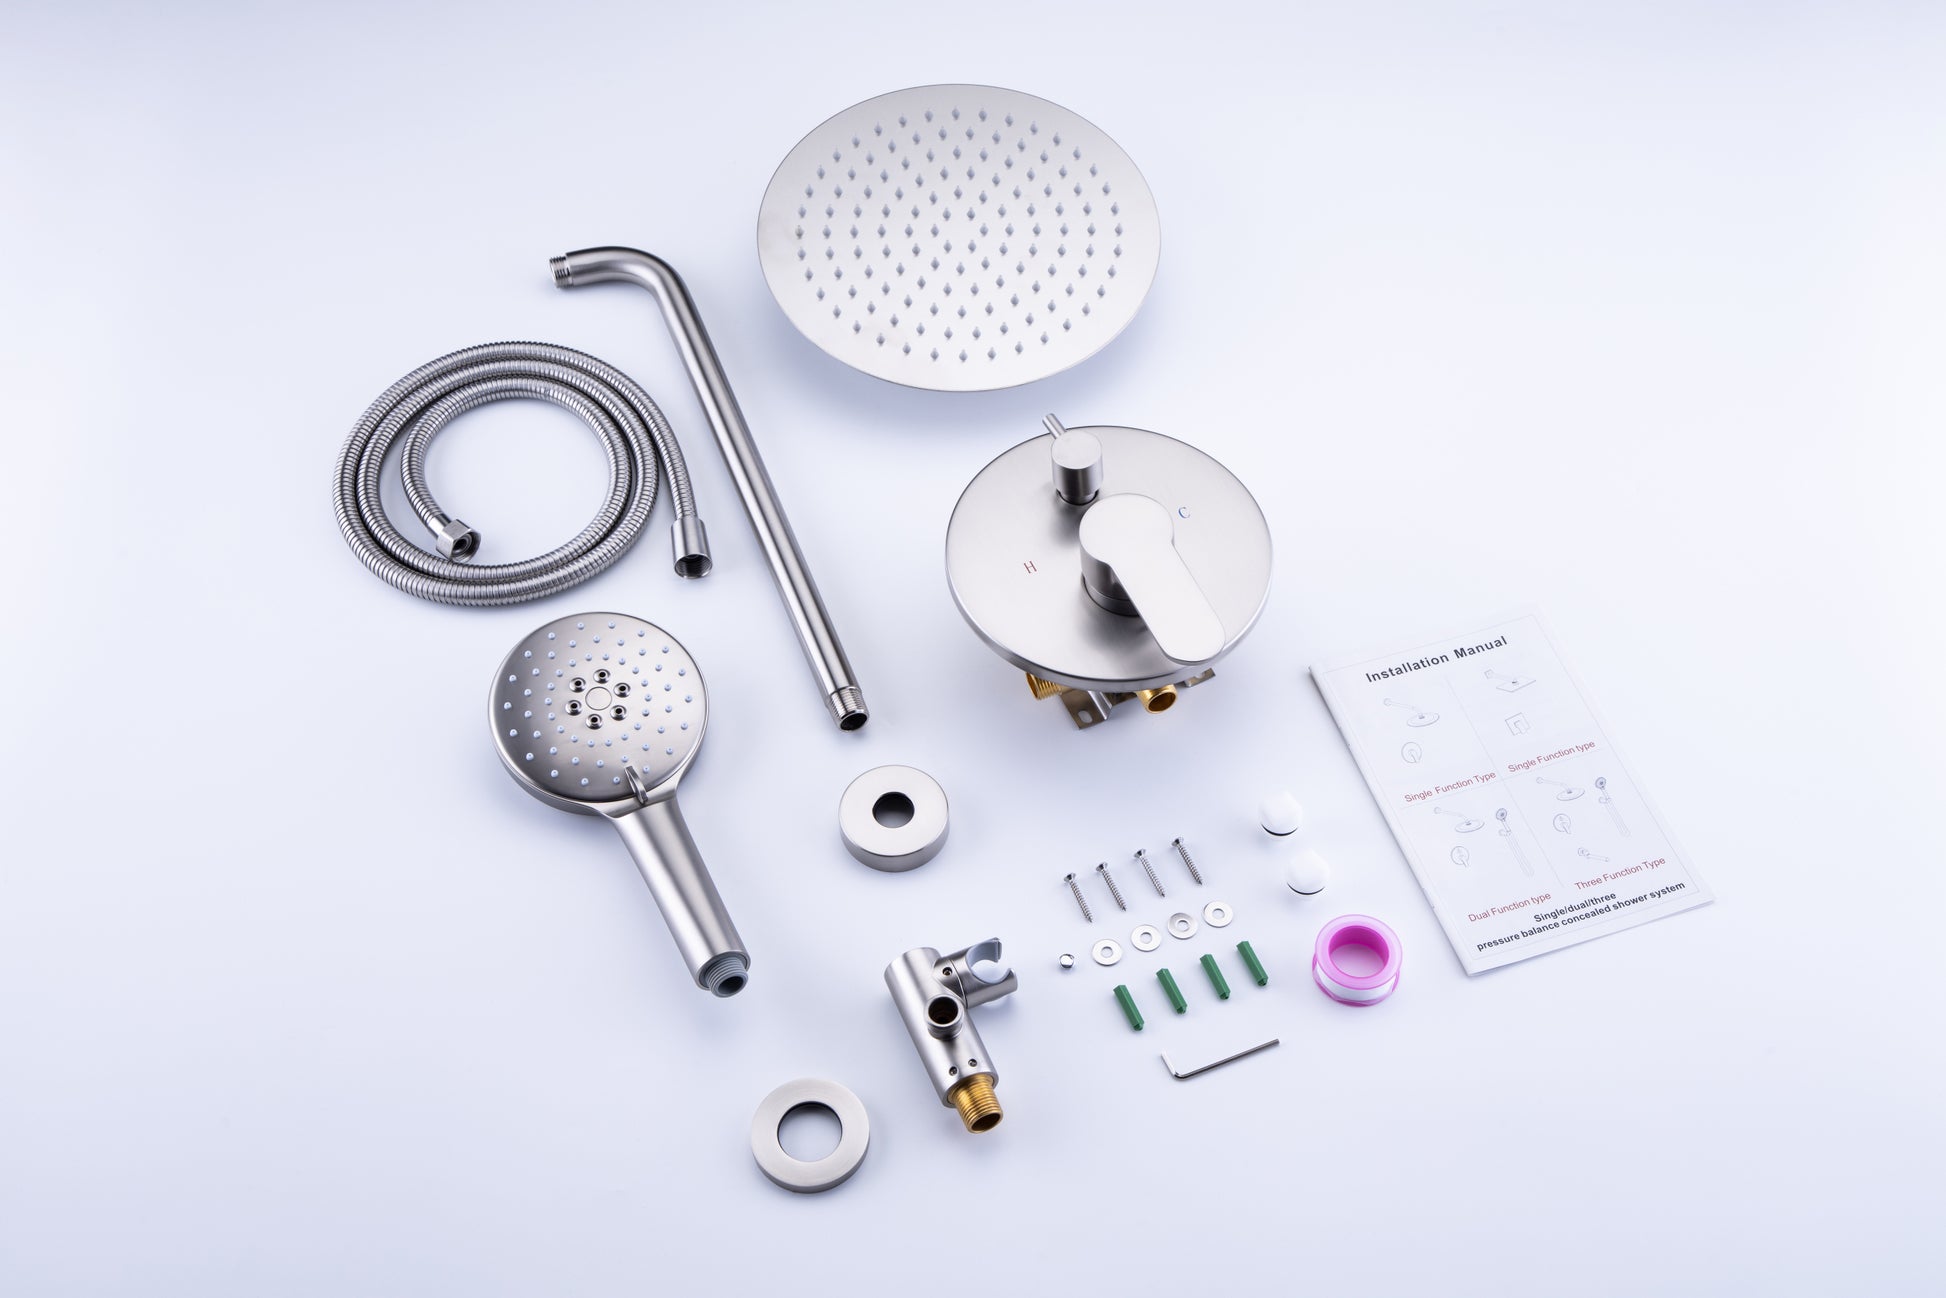 Shower Faucet Set, Wall Mount Round hower System Mixer brushed nickel-brass